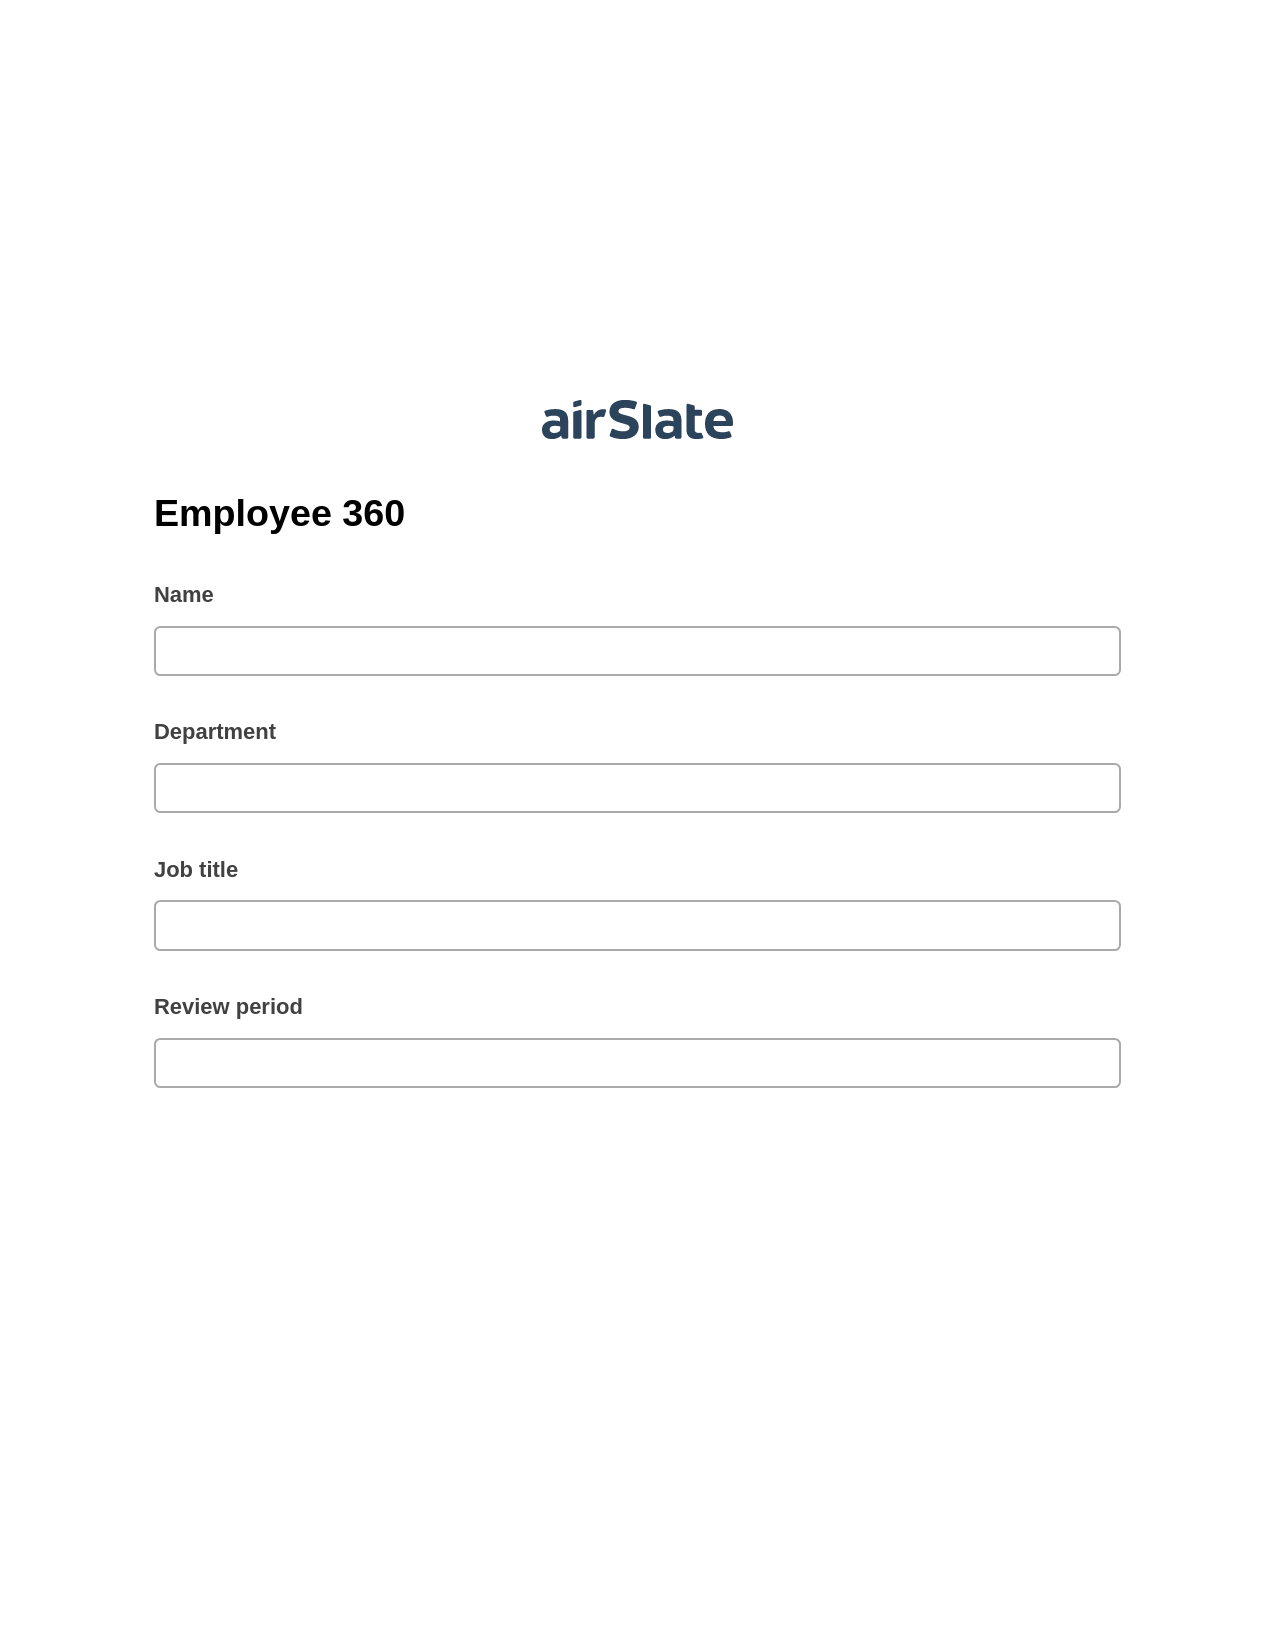 Employee 360 Pre-fill Dropdowns from Airtable, Invoke Salesforce Process Bot, Export to Smartsheet